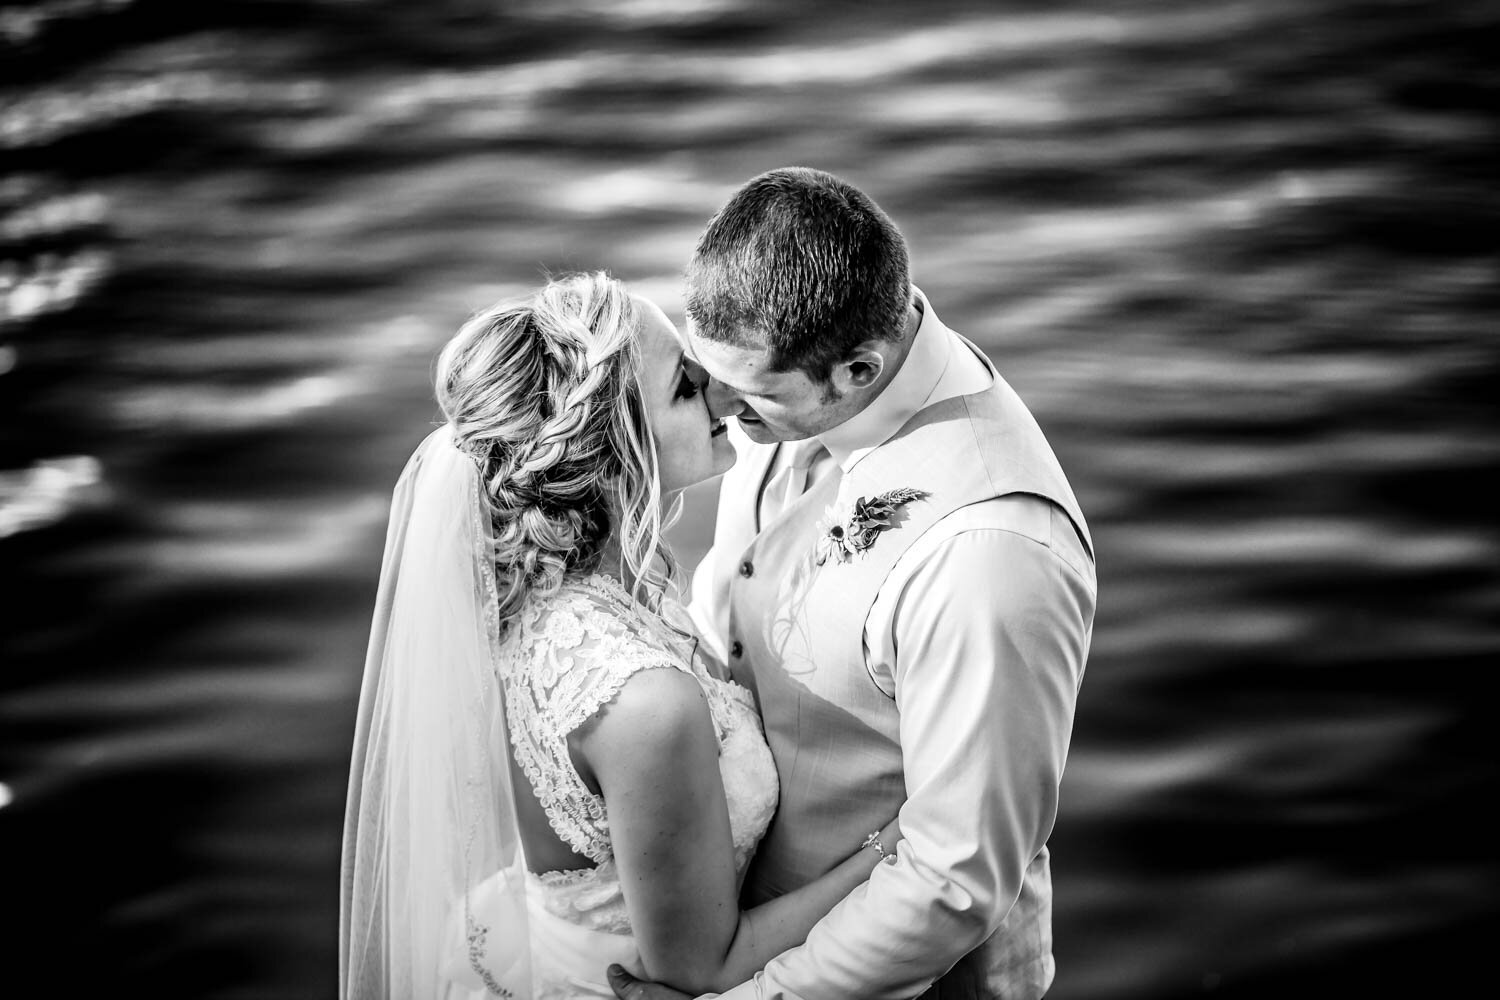  Wedding photos at the dam in Evergreen Colorado, photographed by JMGant Photography 